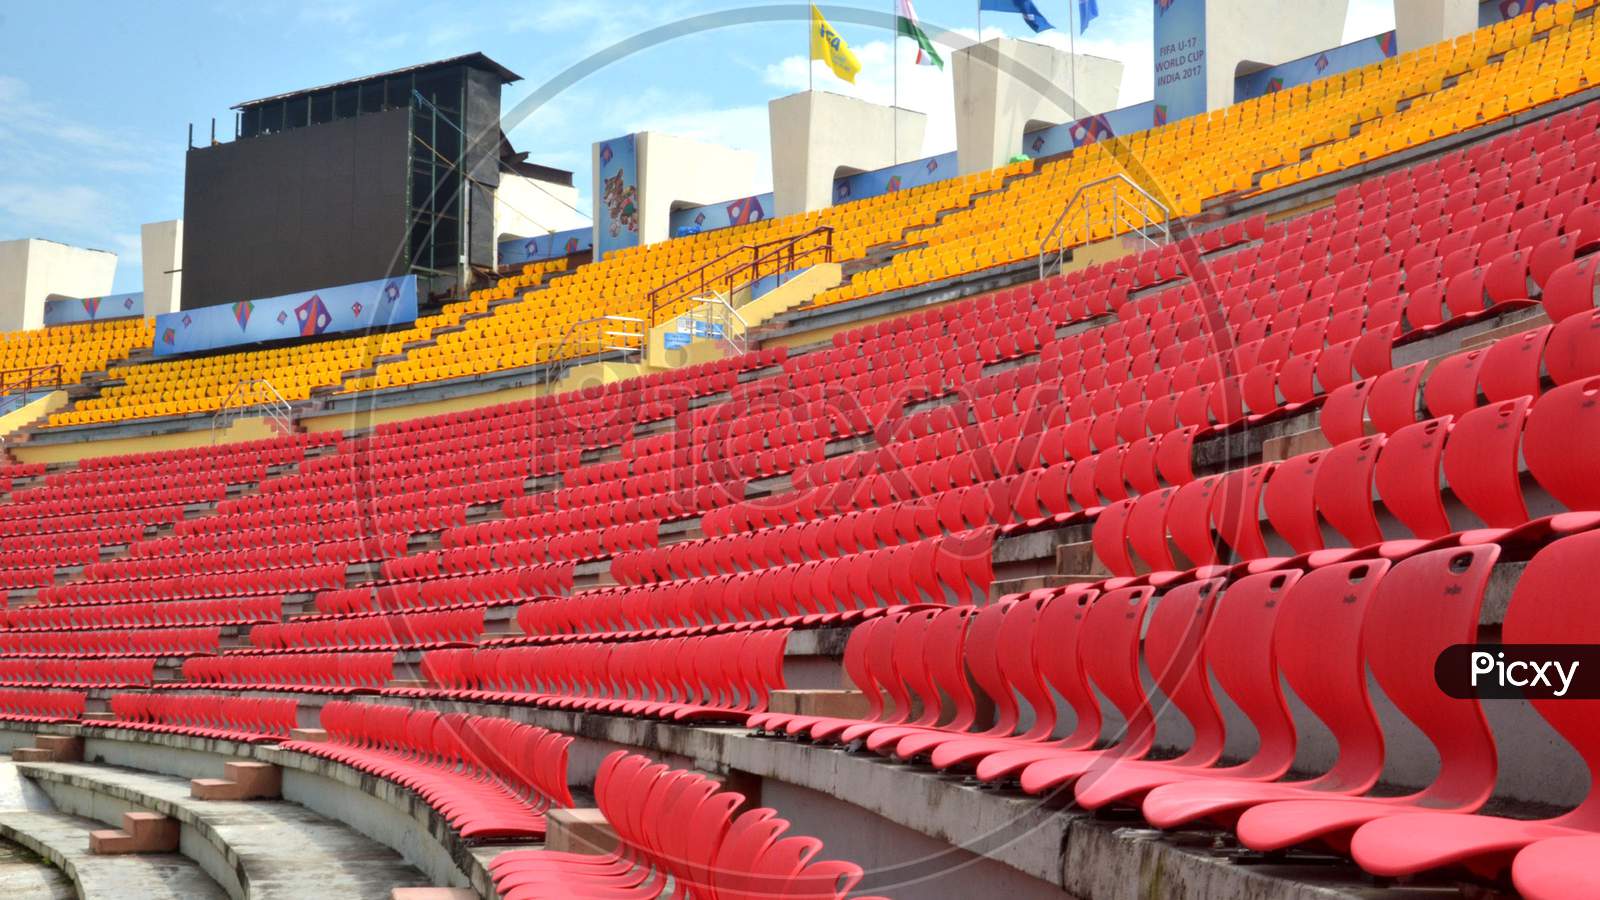 A view of Stadium Chair